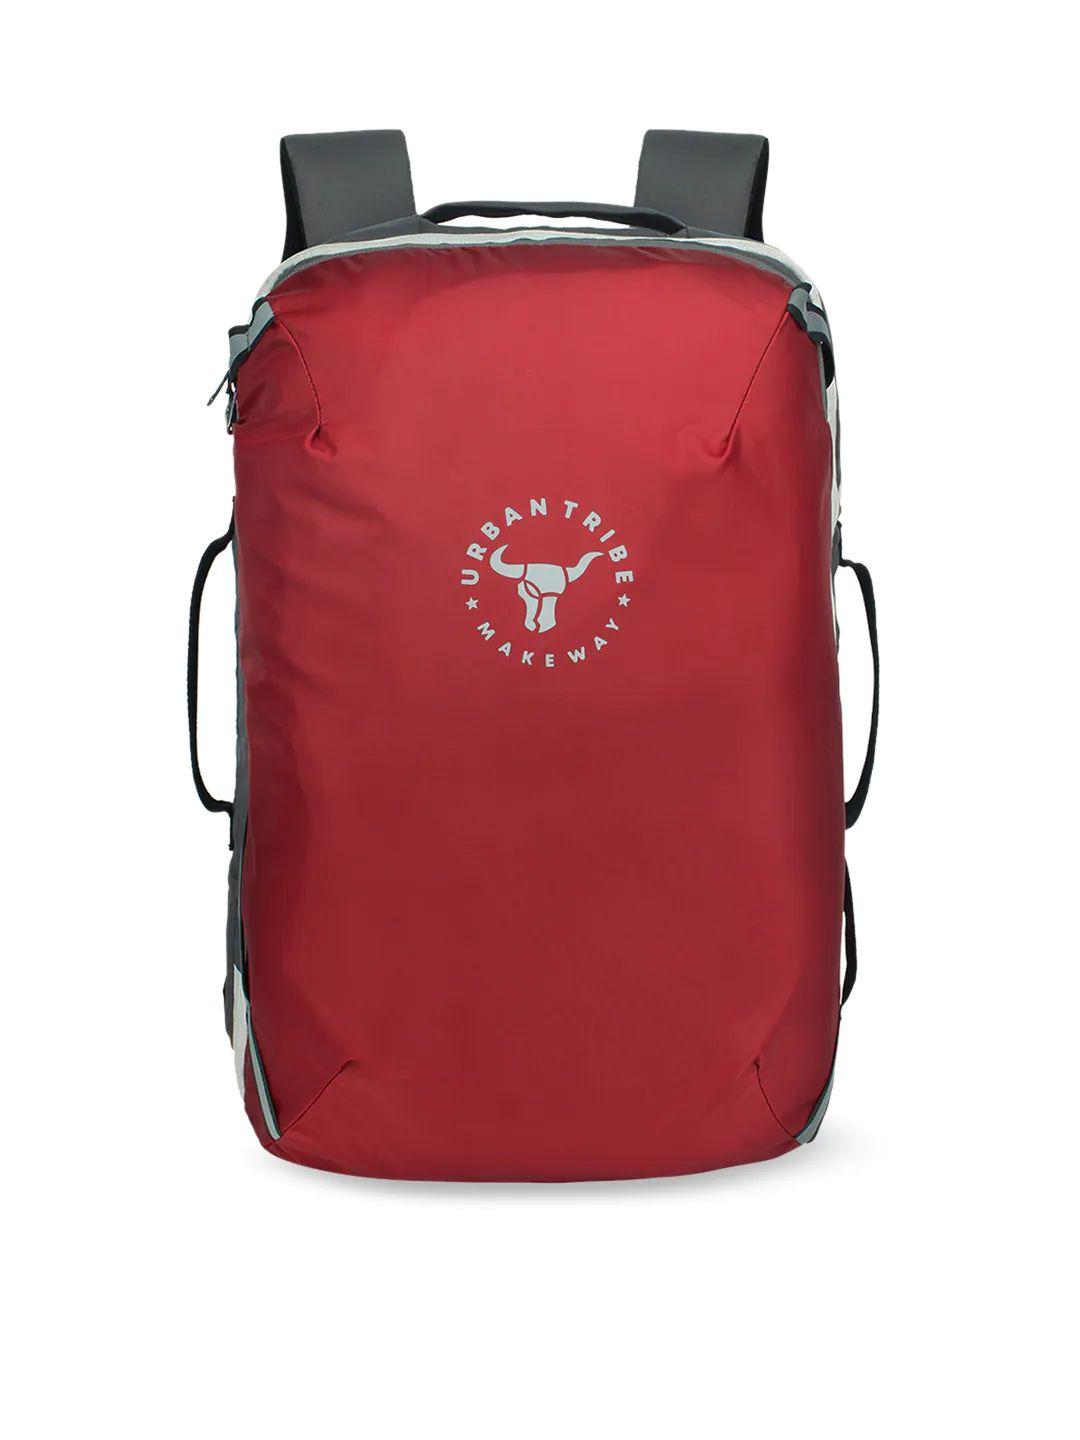 urban tribe unisex red & black water repellent backpack